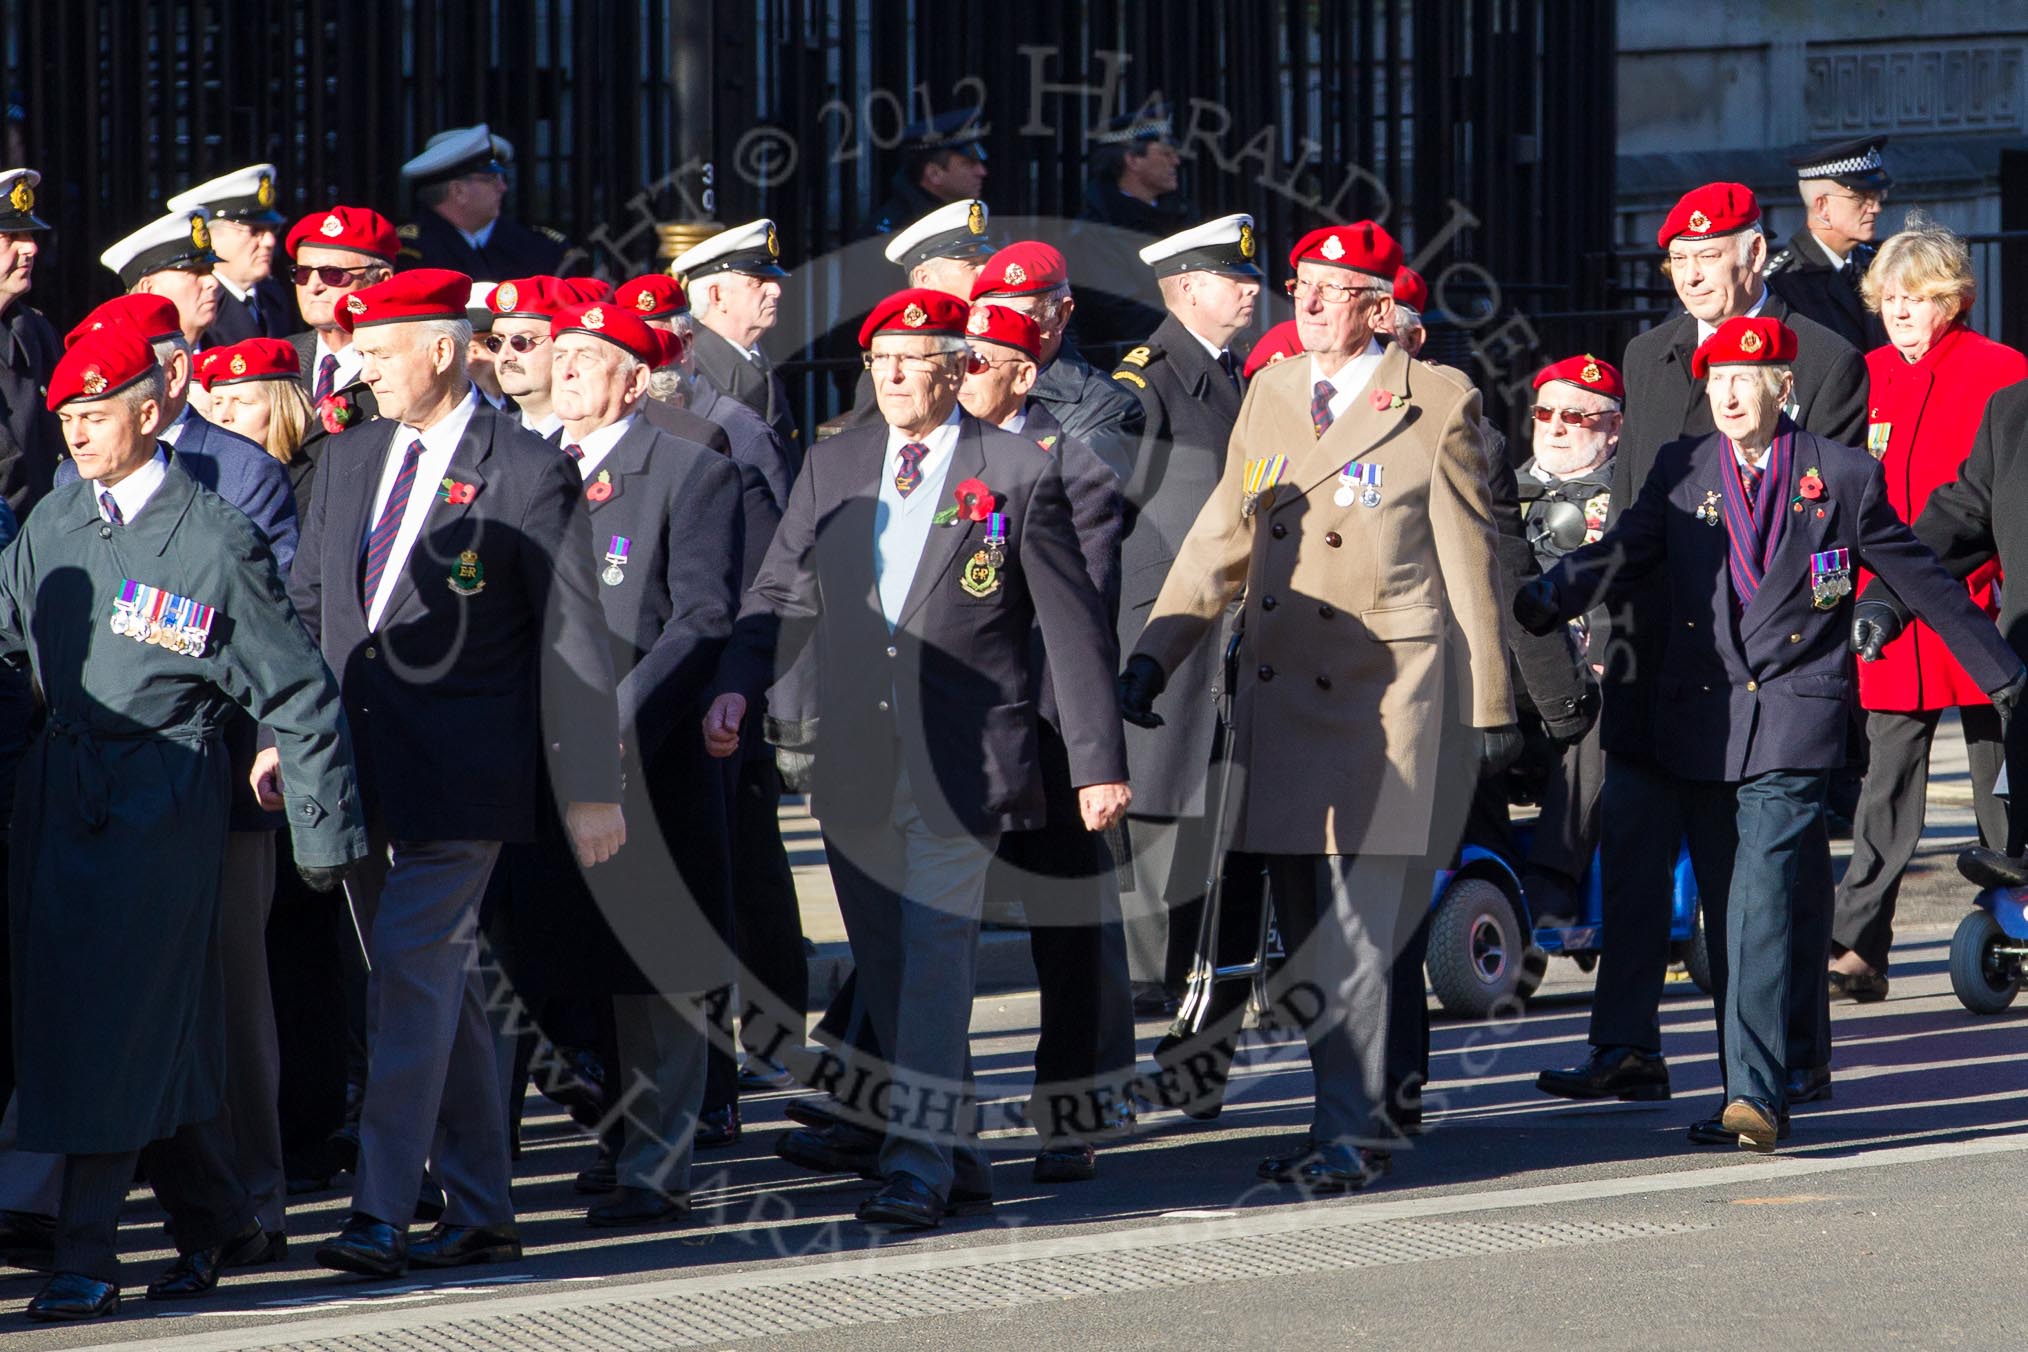 Remembrance Sunday 2012 Cenotaph March Past: Group B3, Royal Military Police Association..
Whitehall, Cenotaph,
London SW1,

United Kingdom,
on 11 November 2012 at 11:55, image #827